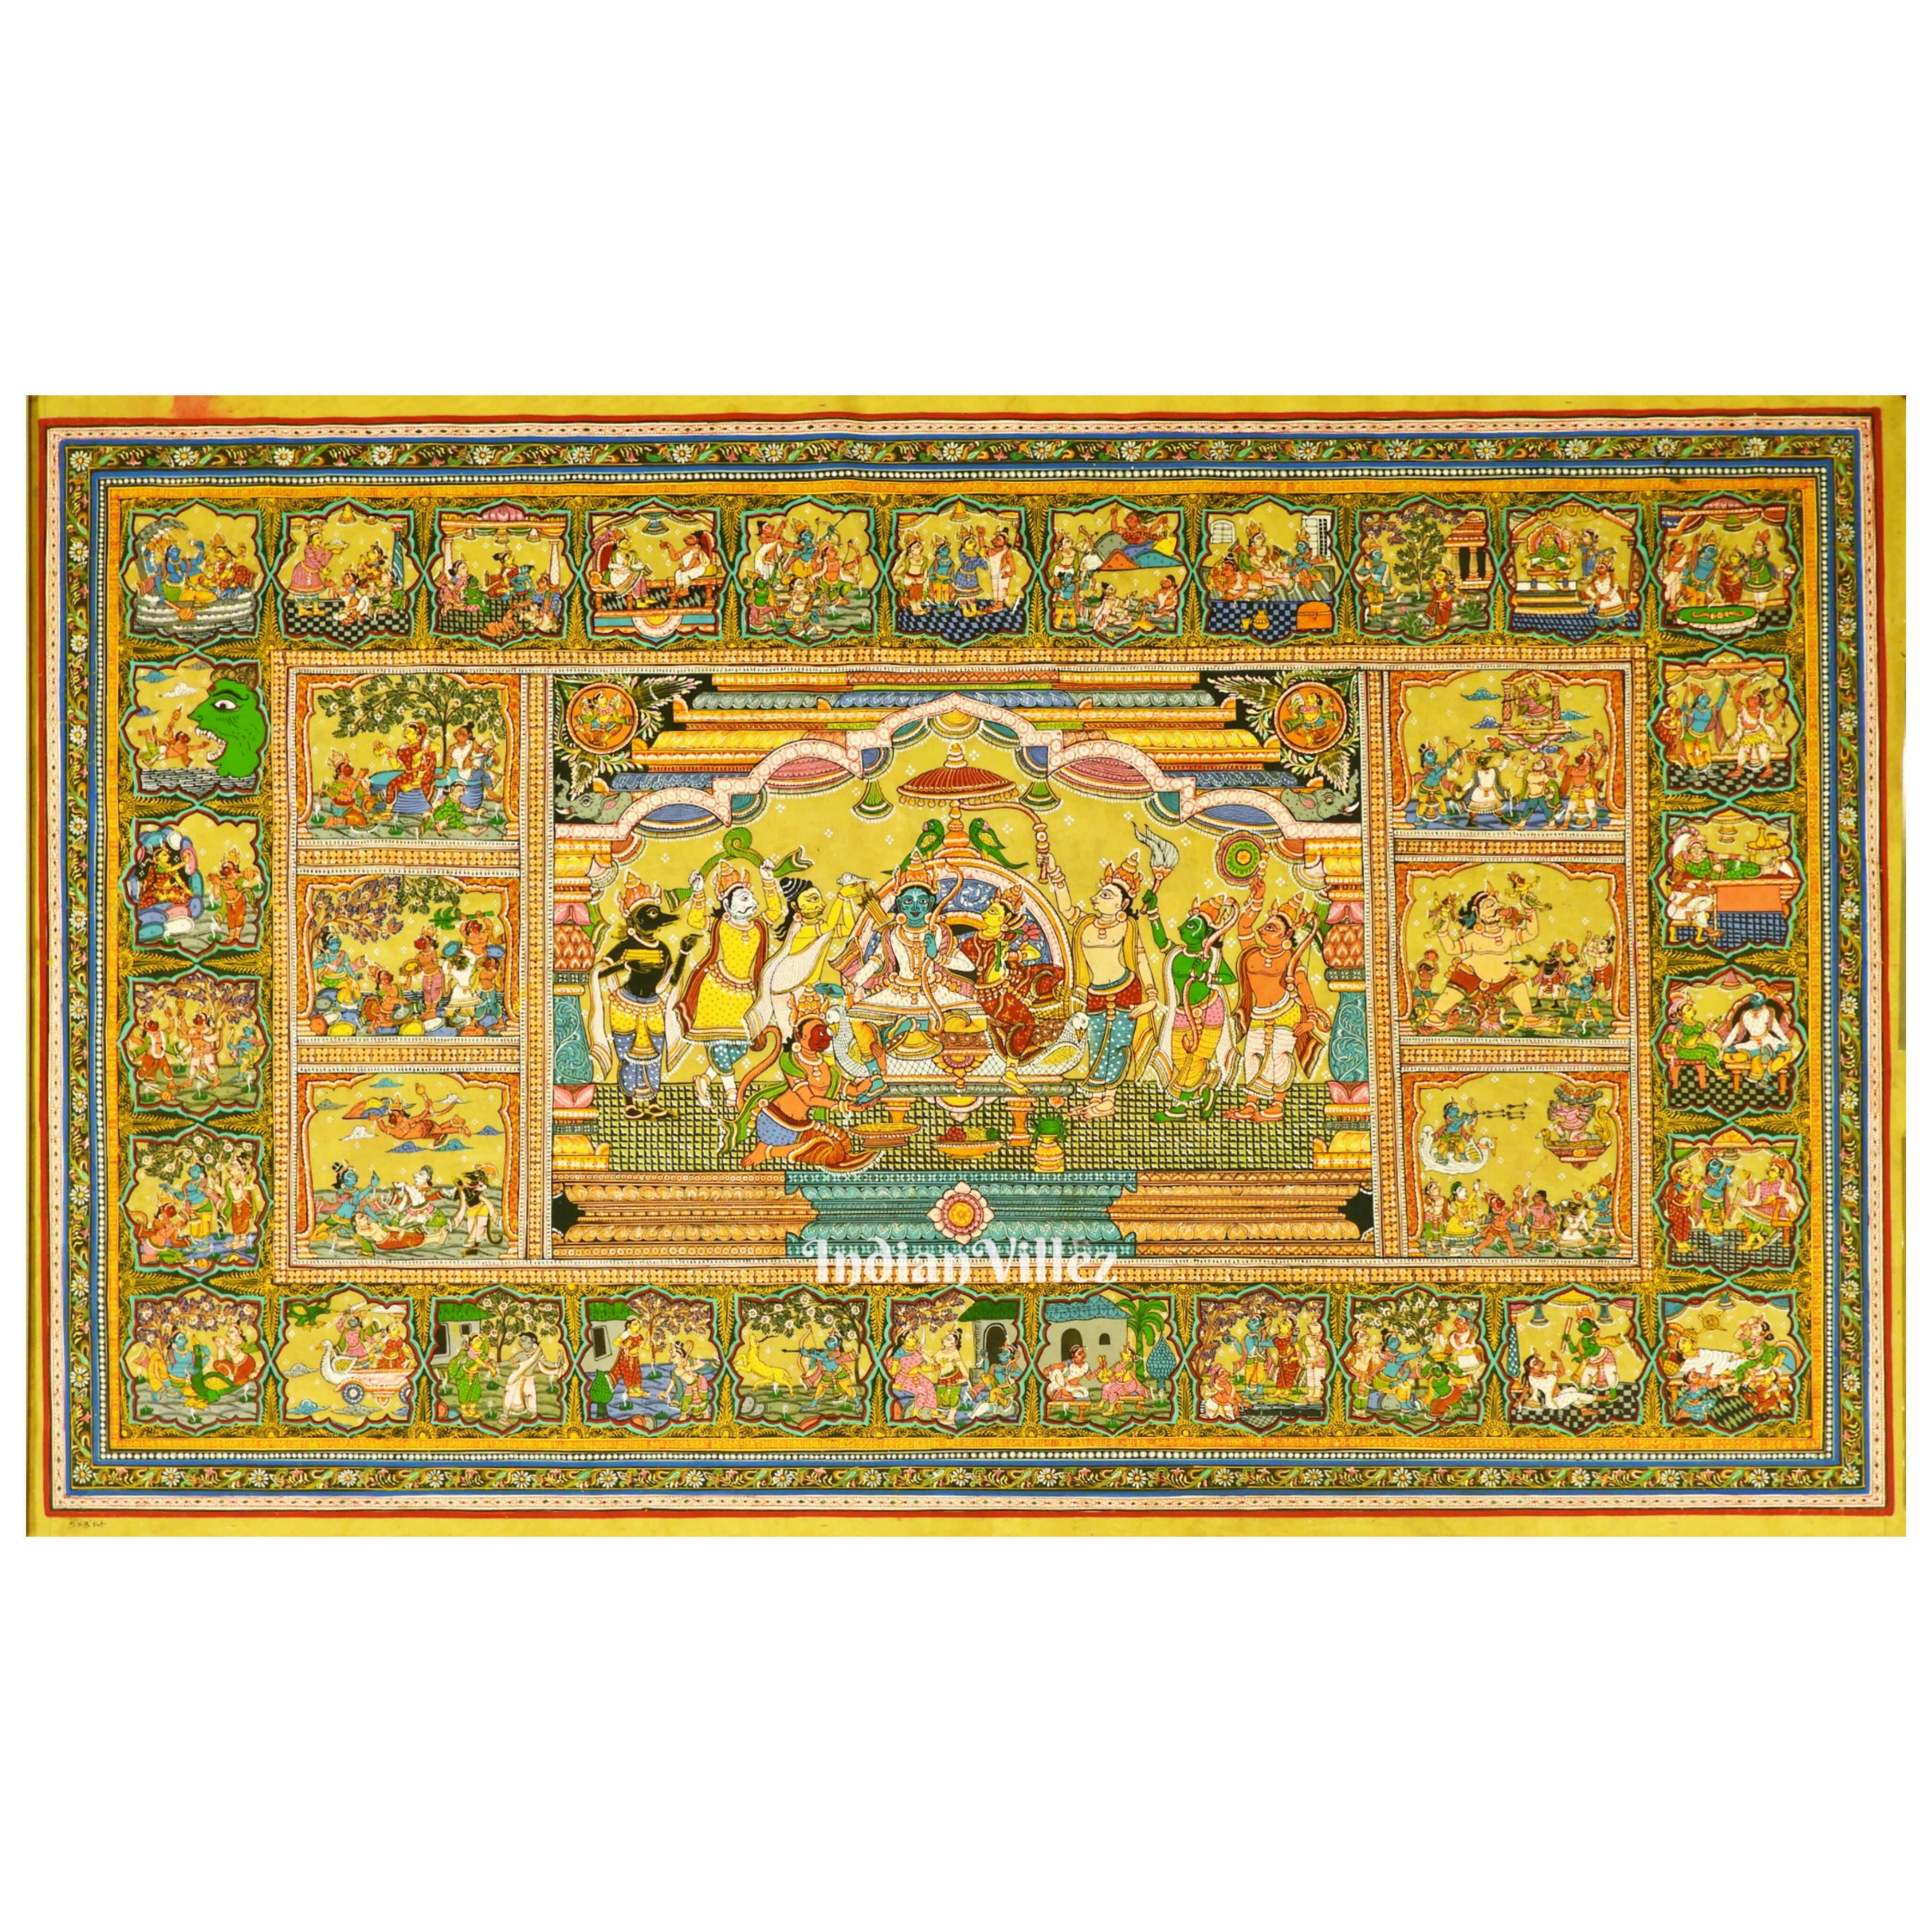 Ramayana Story Pattachitra Painting for Home Wall Art Decor